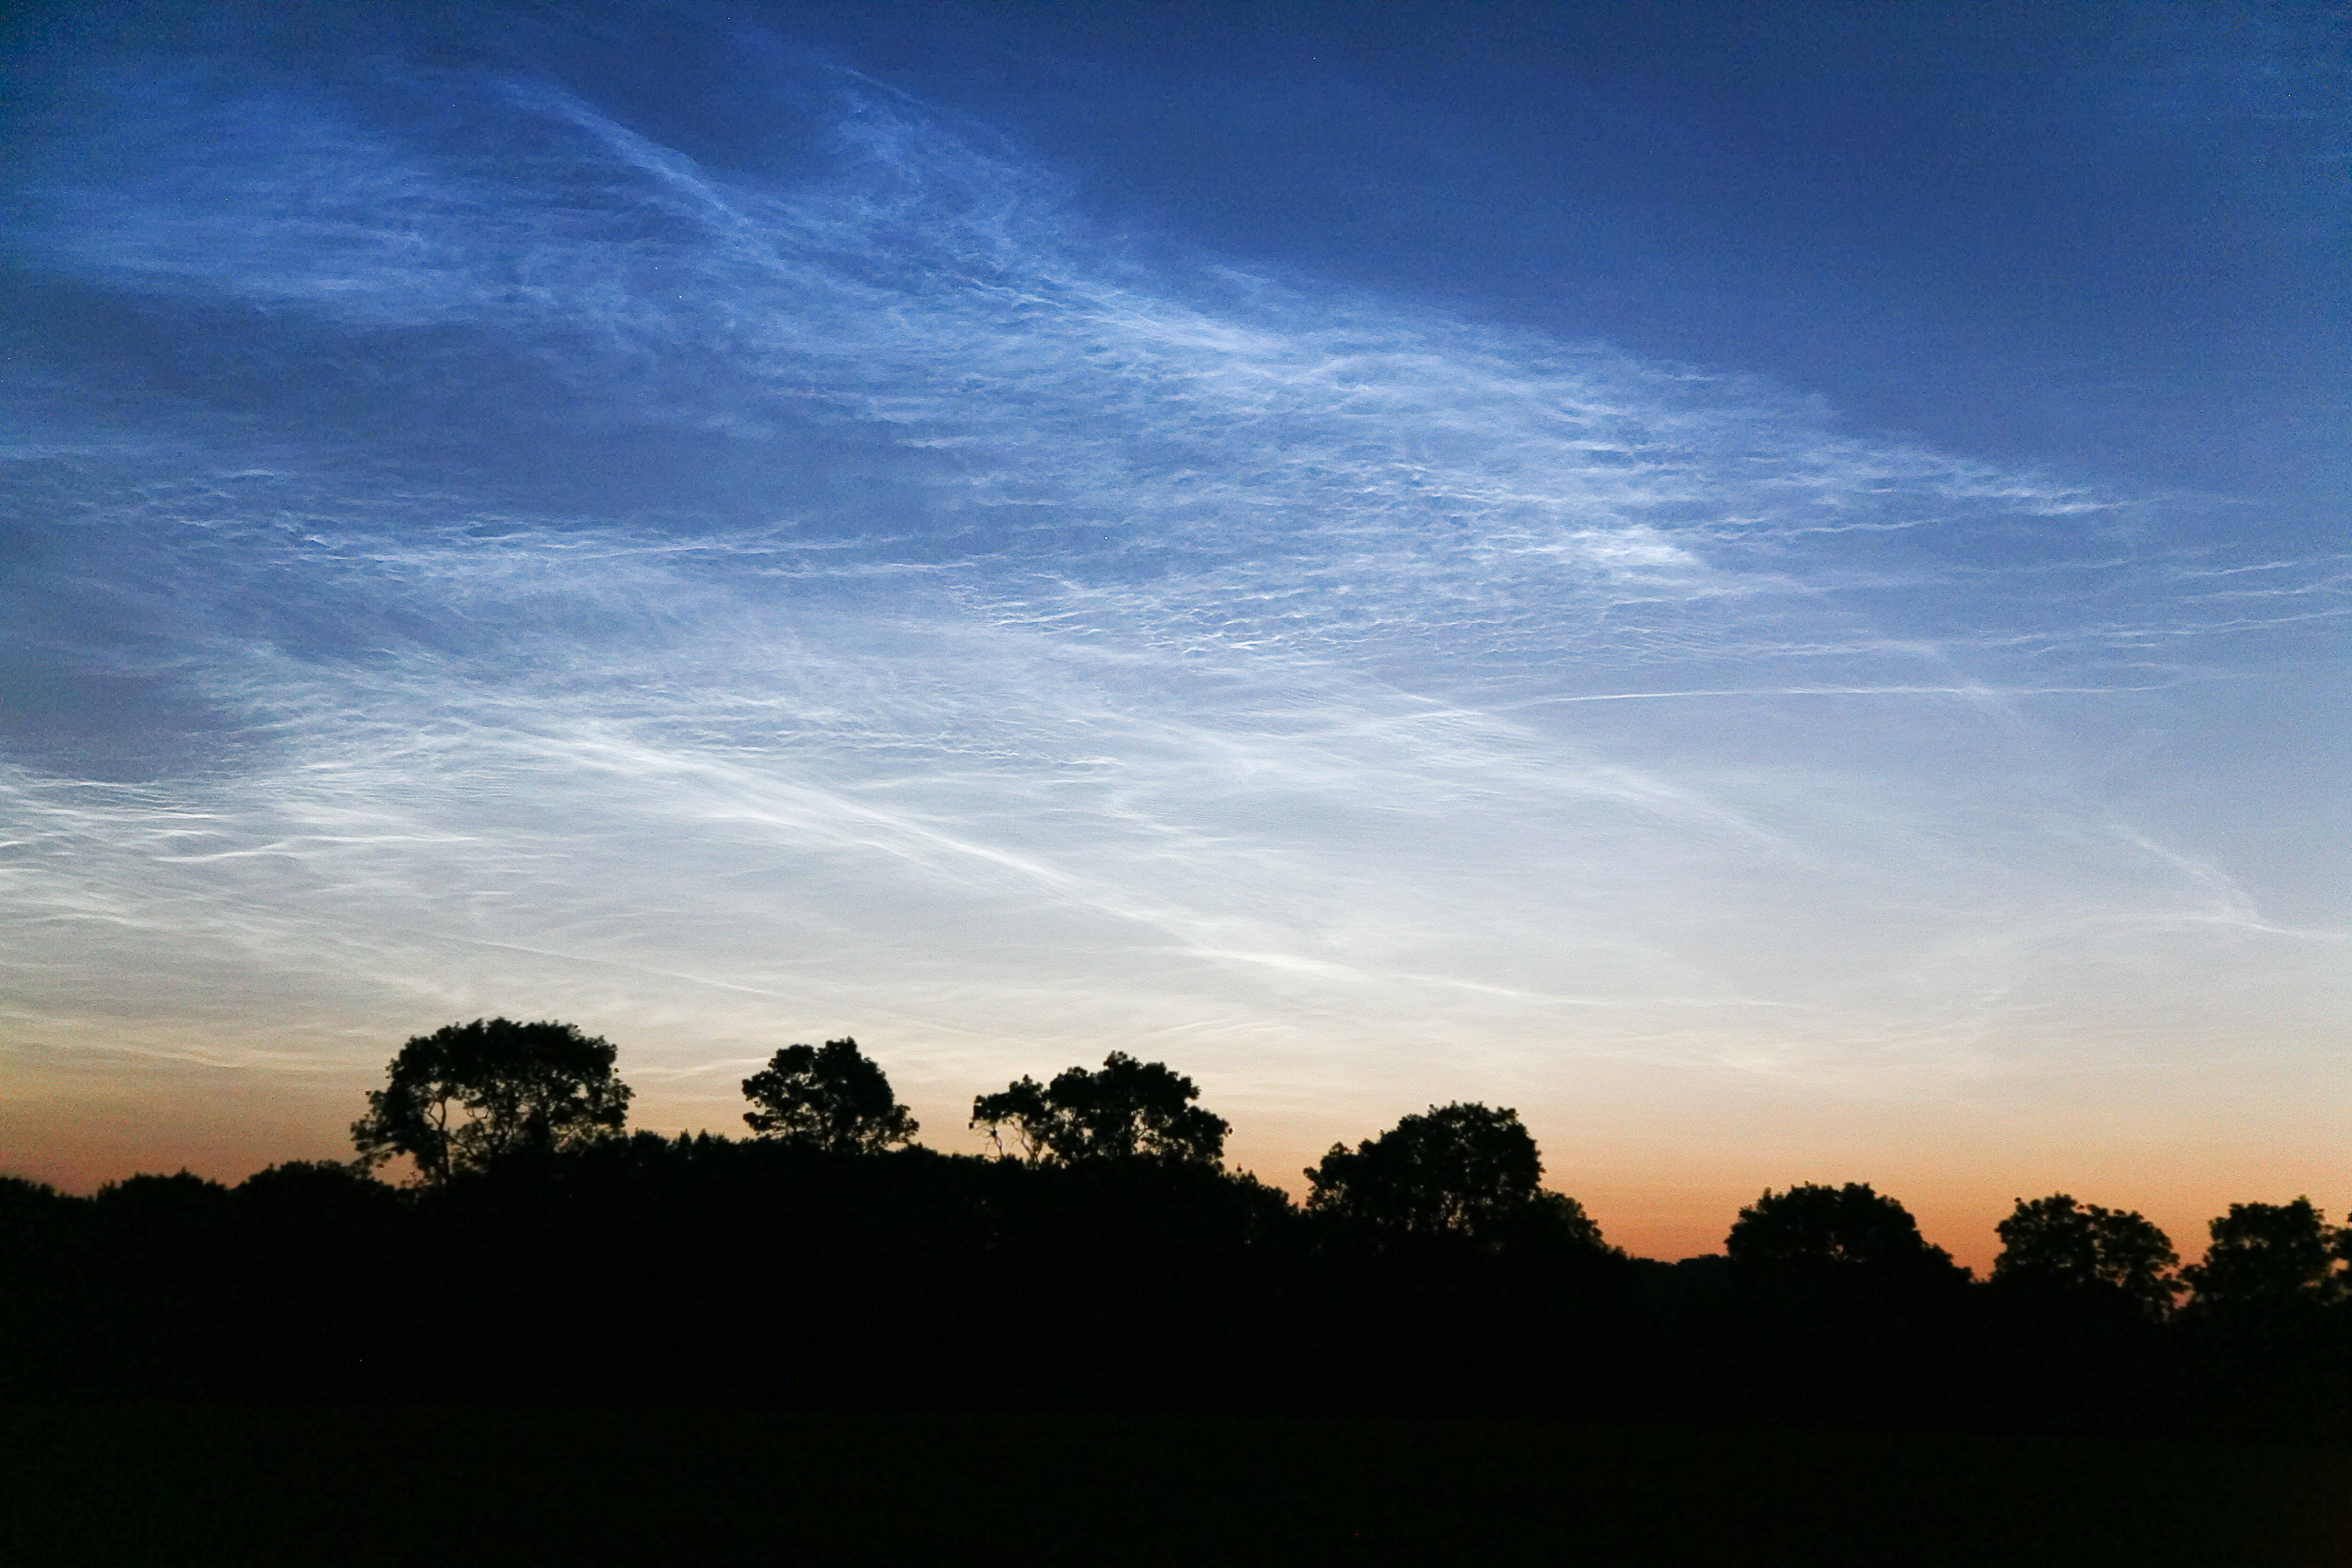 Photographs of noctilucent clouds appearing in the night sky over Britain on July, 2009.